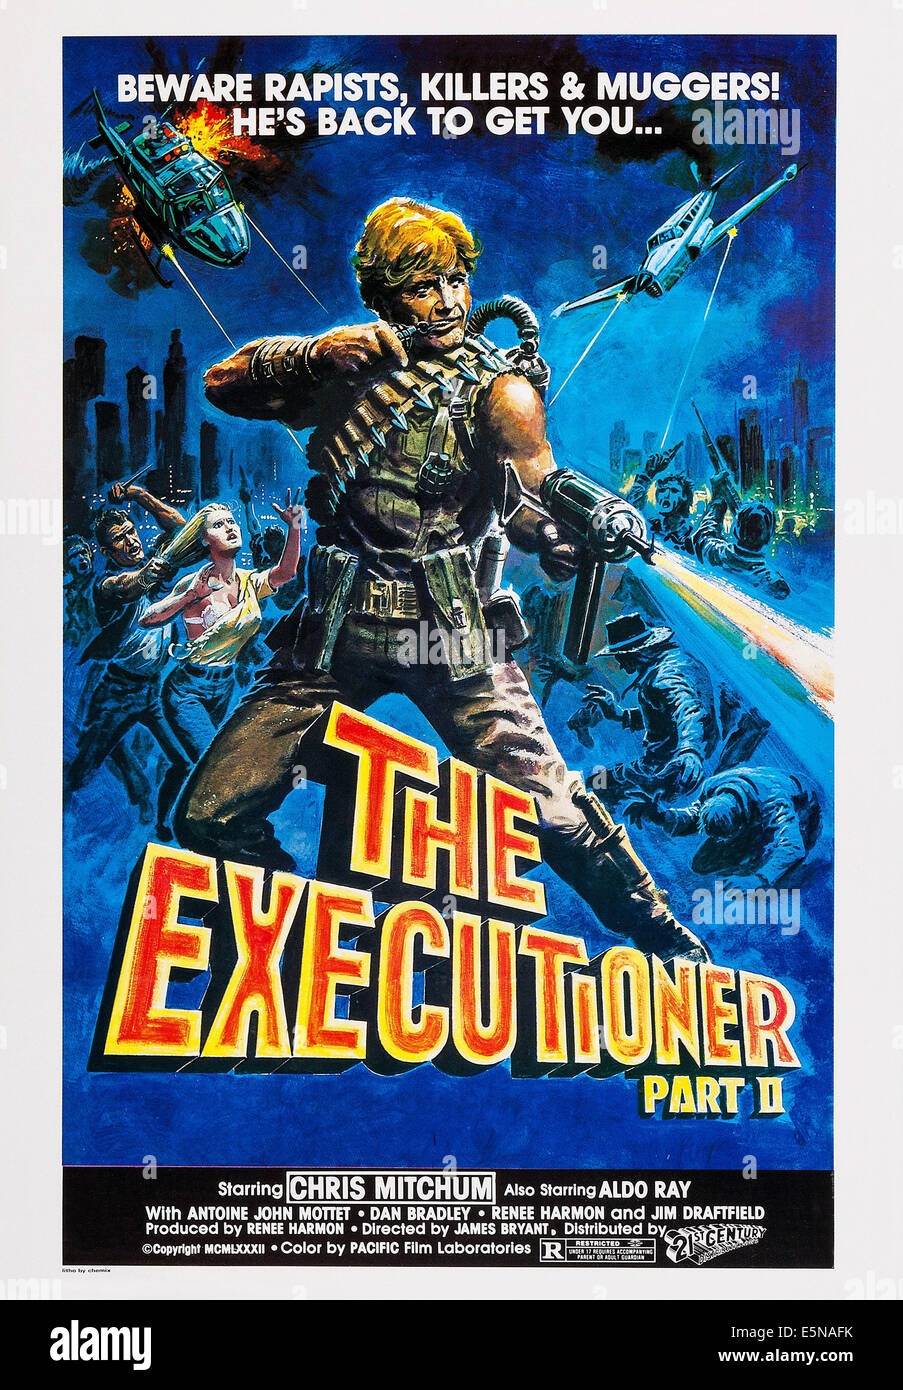 THE EXECUTIONER, PART II, US poster art, Chris Mitchum, 1984. ©21st Century Film Corporation/courtesy Everett Collection Stock Photo